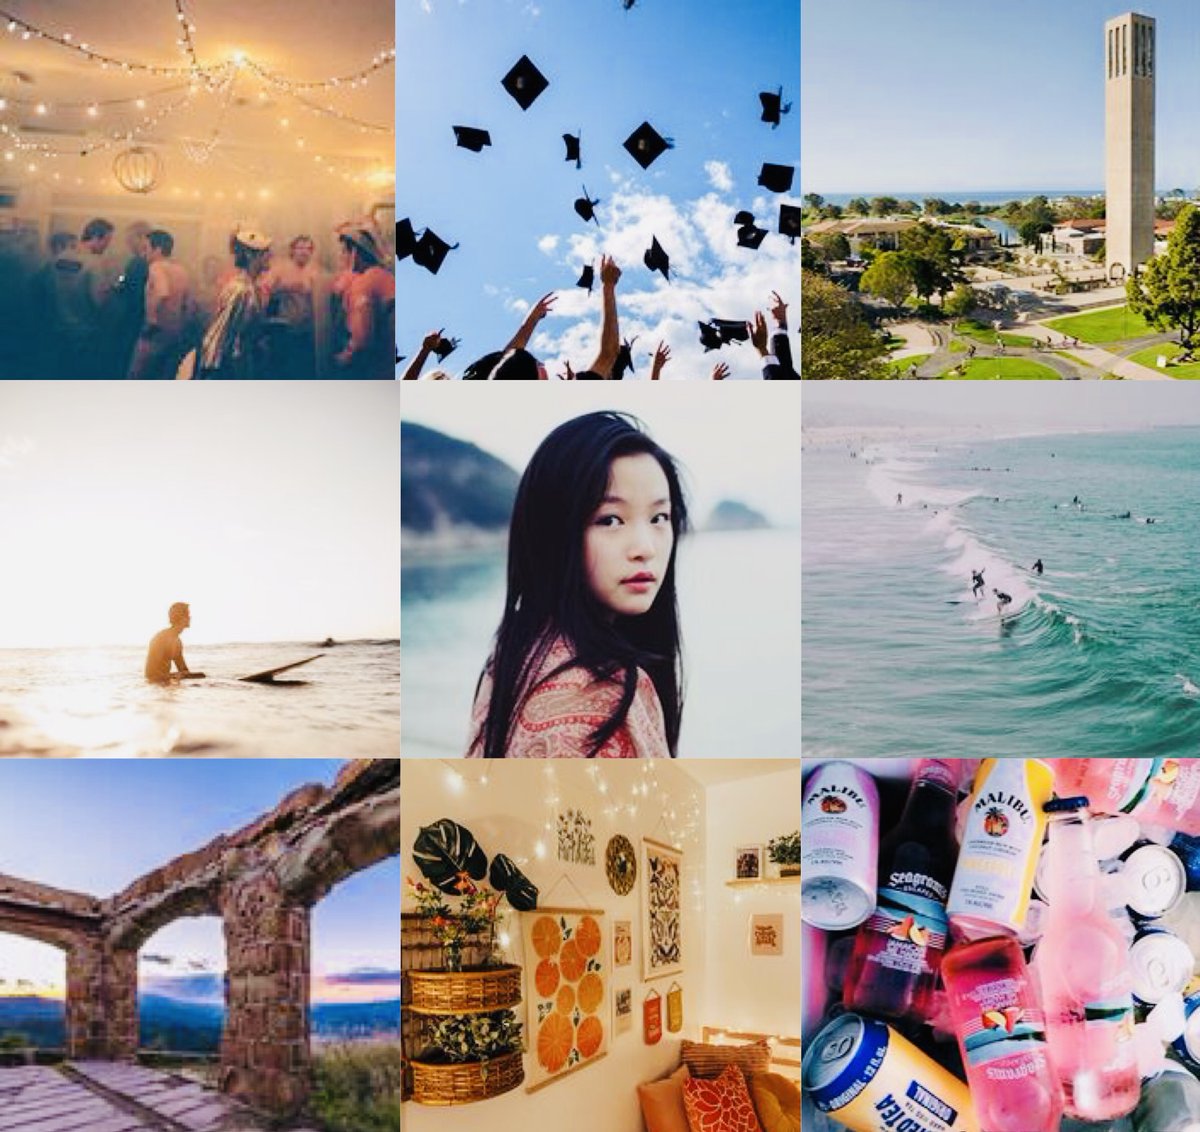 SINCE YOU’VE BEEN GONE x WHEN YOU WERE EVERYTHING Elle’s always stuck to the safe side. But after her BFF drops her, Elle wants a do-over and sets out to finish the high school bucket list she failed… only now she’ll try again as a college freshman. #questpit #YA #amquerying